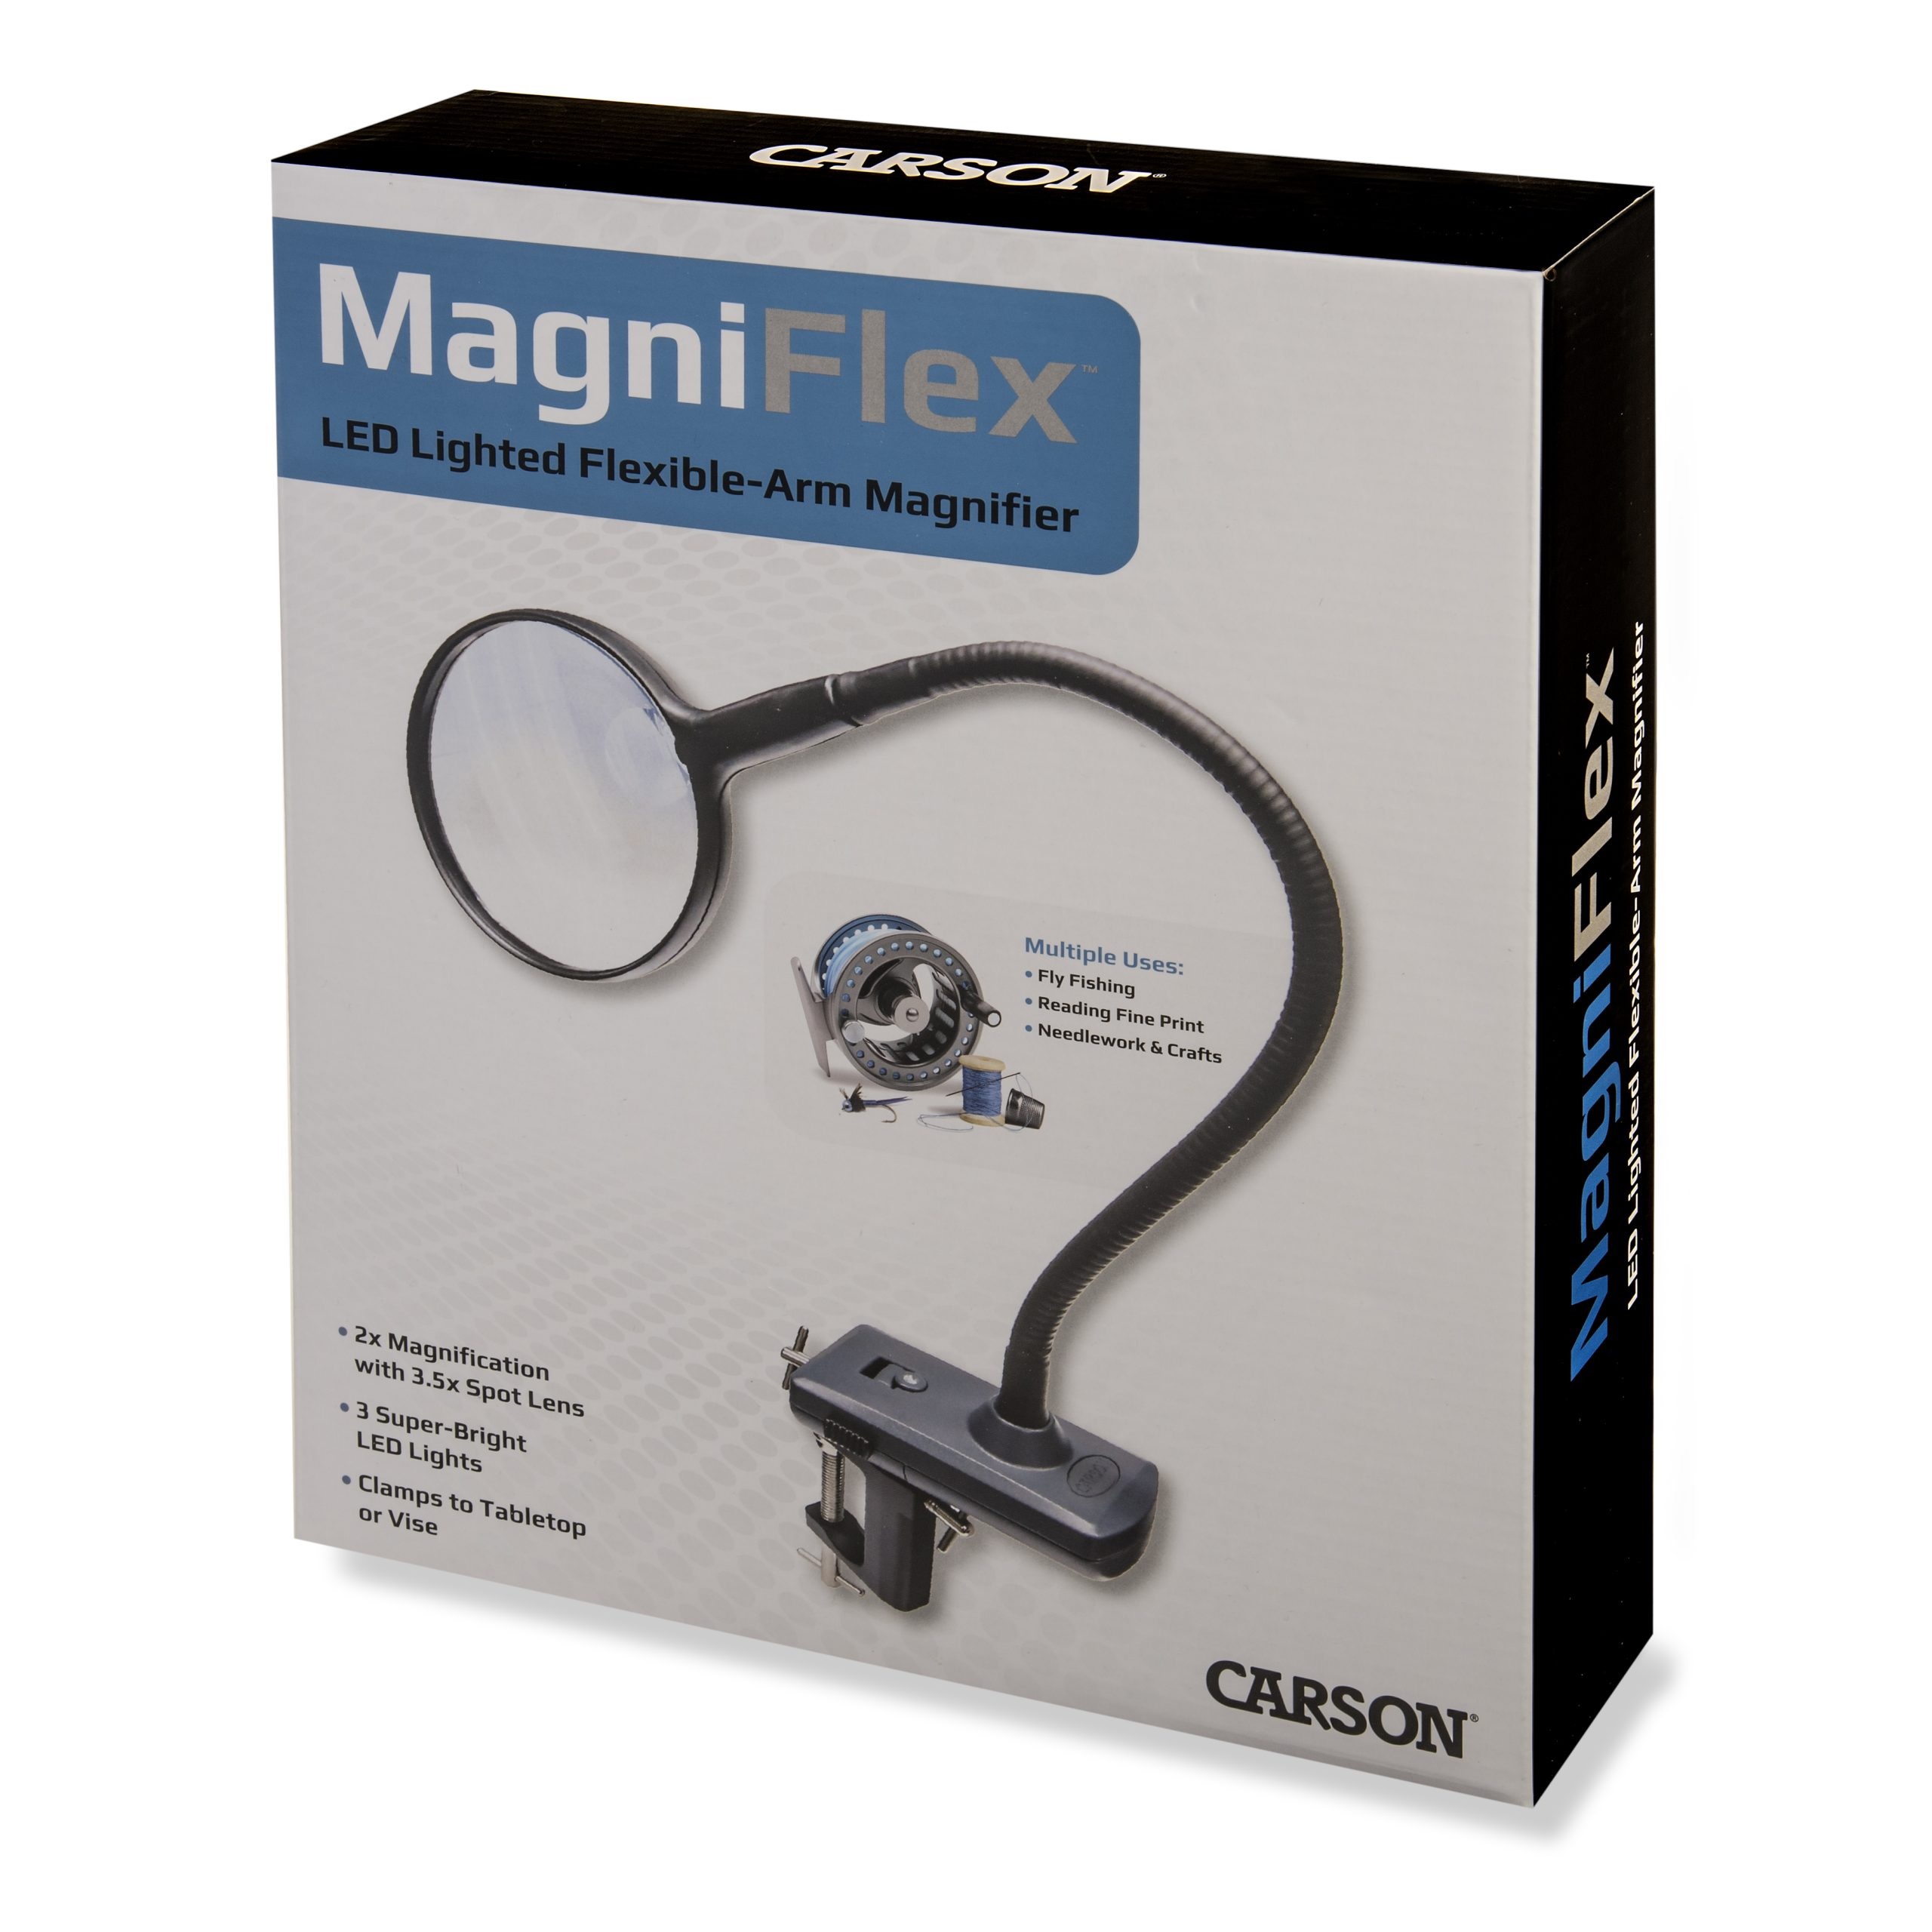 CL-65 MagniFlex™ a lighted, fully-adjustable, flexible arm Hands Free Magnifier that attaches to your table-top for convenient Hands Free use